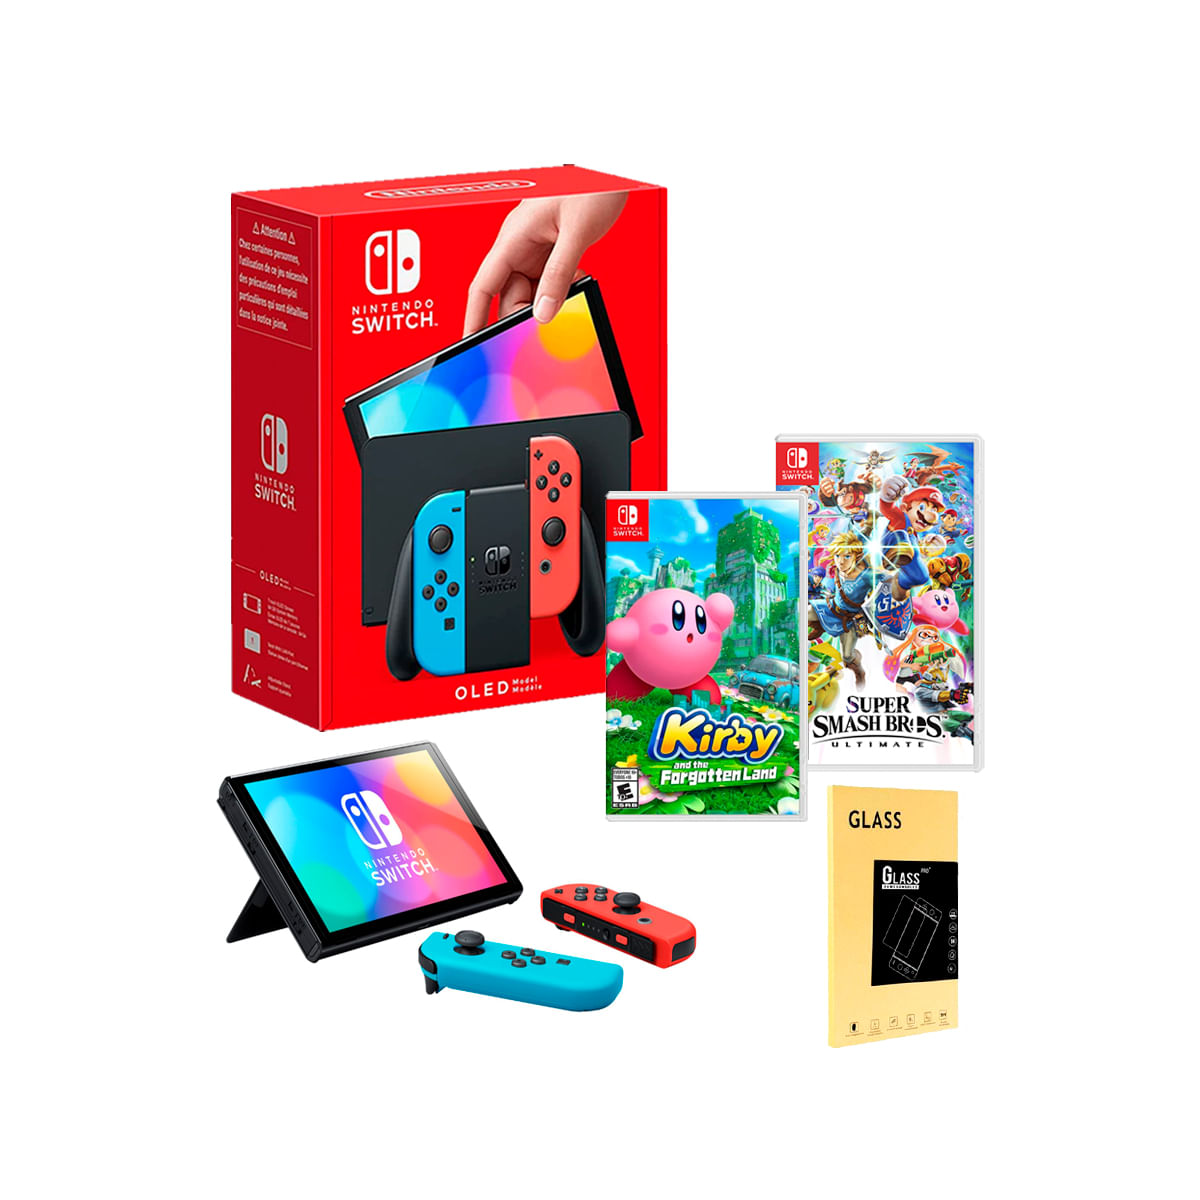 Consola Nintendo Switch Oled Neon + Kirby and the Forgotten Land + Smash Bros + Mica